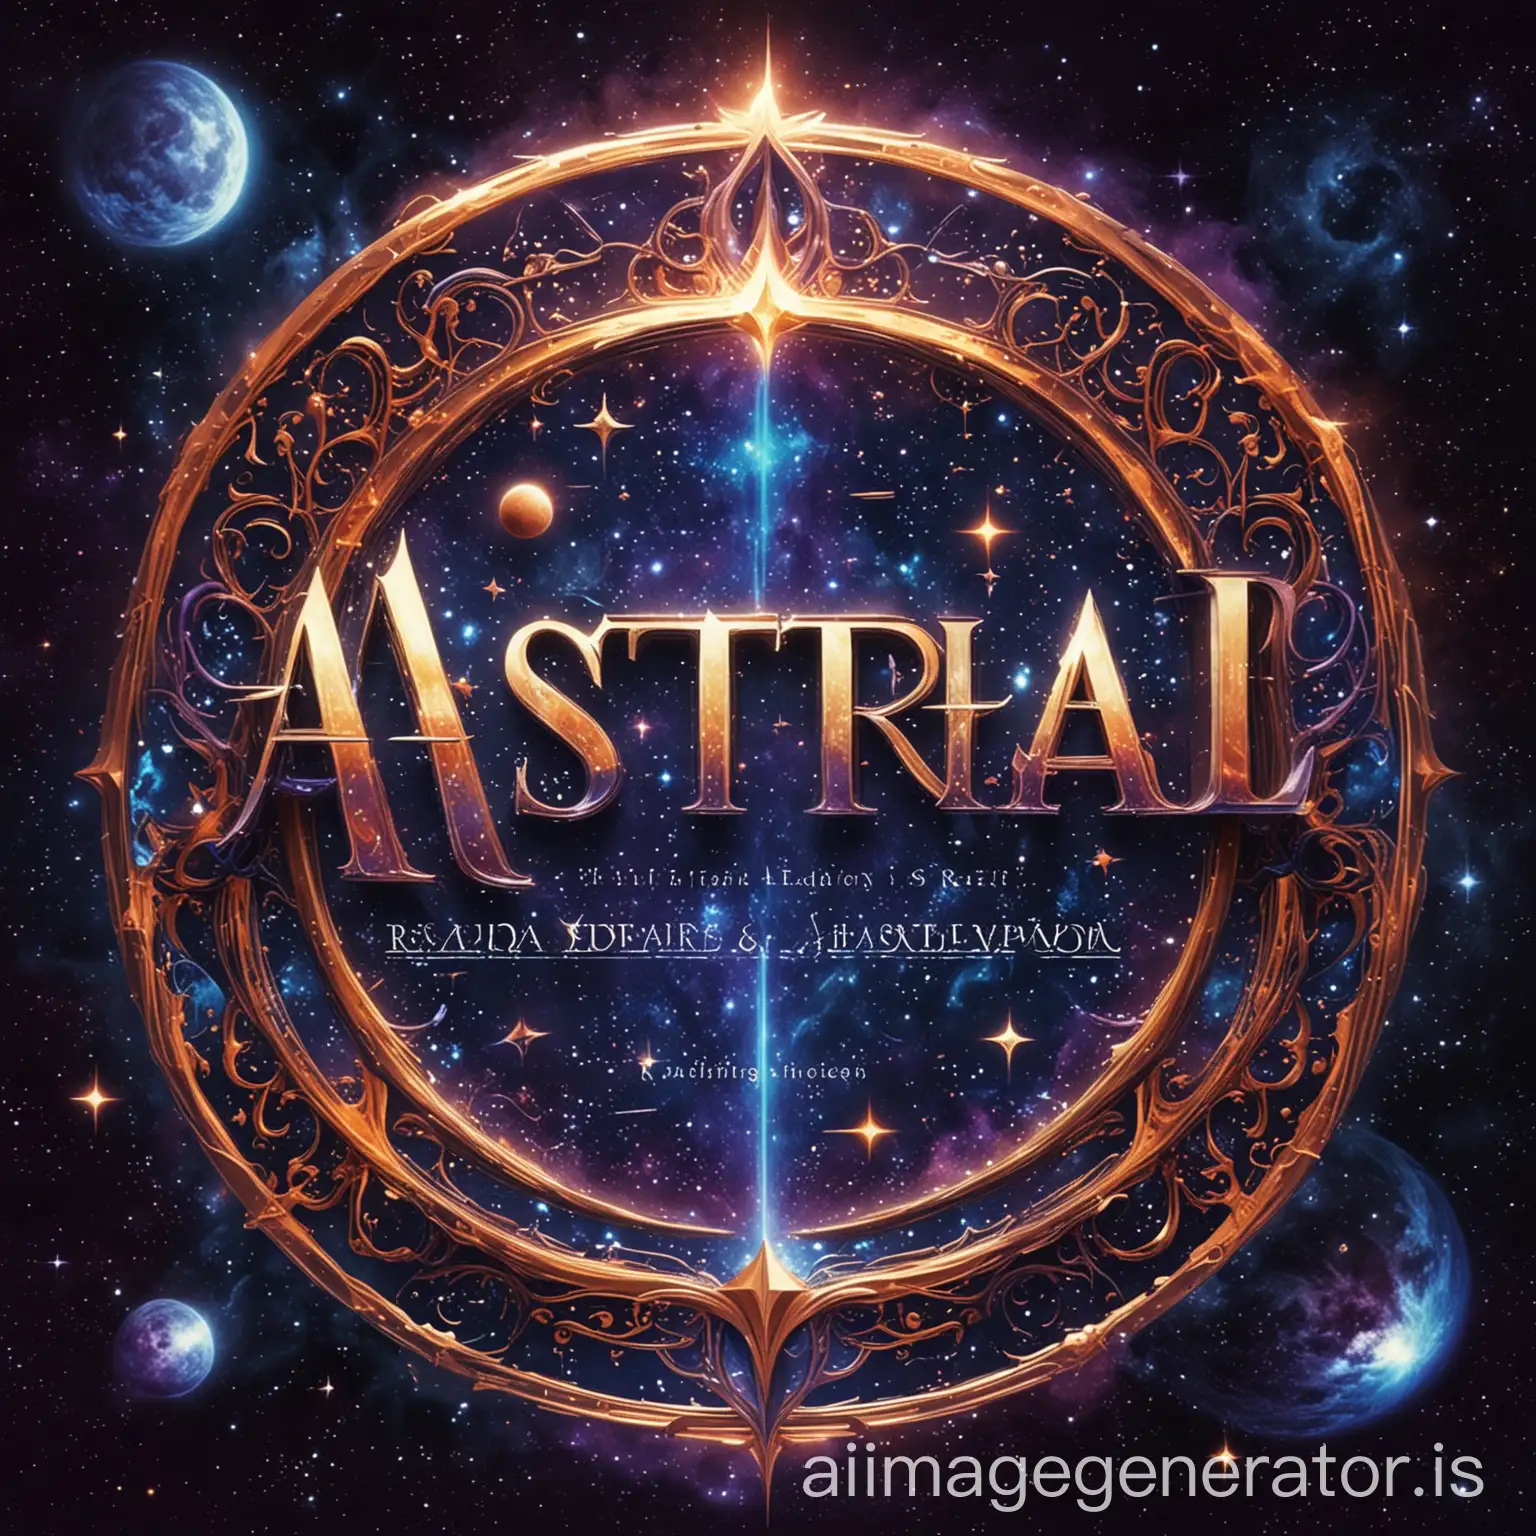 ChatGPT
For the font design and color scheme of "Astral Redemption," envision a bold yet elegant script font for the title, adorned with celestial motifs. Subtitle and author name can utilize clean sans-serif or serif fonts with subtle cosmic elements. Colors should reflect cosmic themes, with vibrant blues, purples, and oranges for the title and a subdued metallic tone for the author name. This approach ensures a visually captivating cover that encapsulates the essence of the story's cosmic journey.